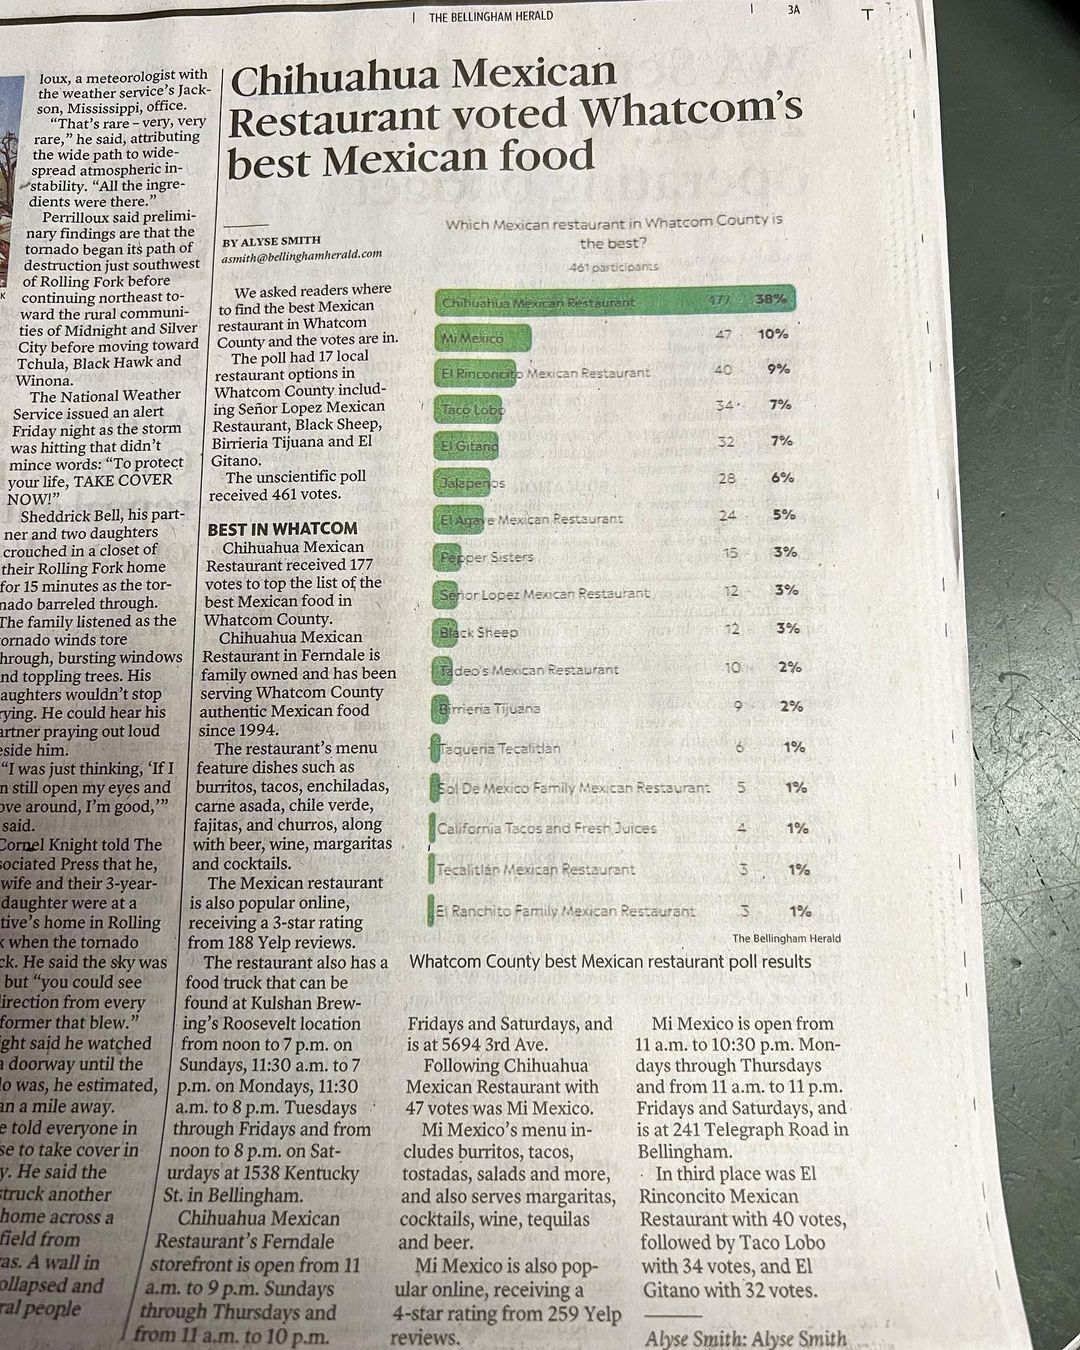 Chihuahuas Mexican Restaurant Voted Best Mexican Food in Whatcom County